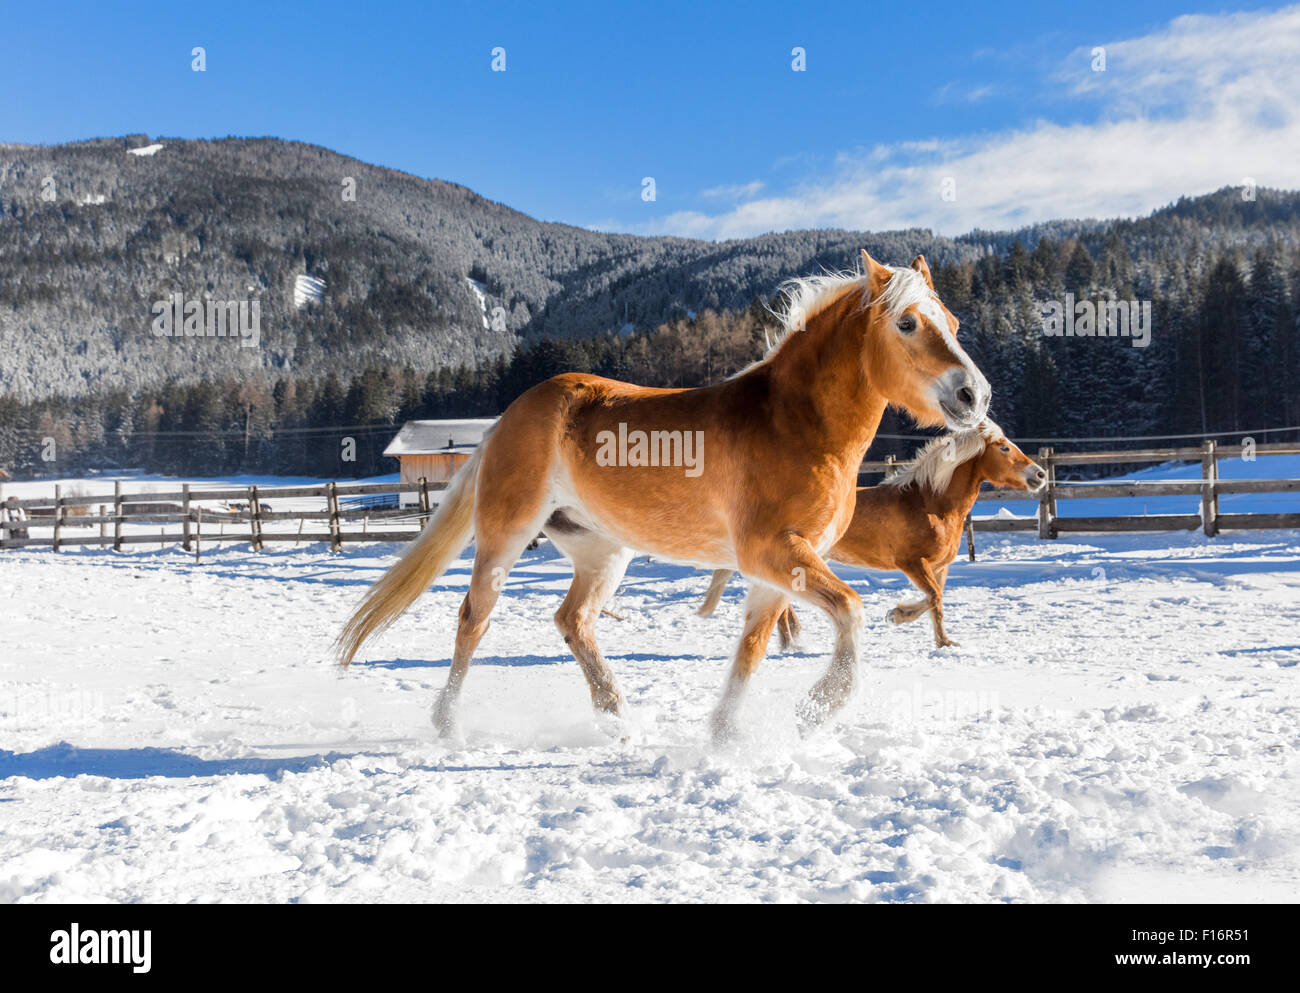 San Candido, Italy, horses galloping across a snowy paddock Stock Photo